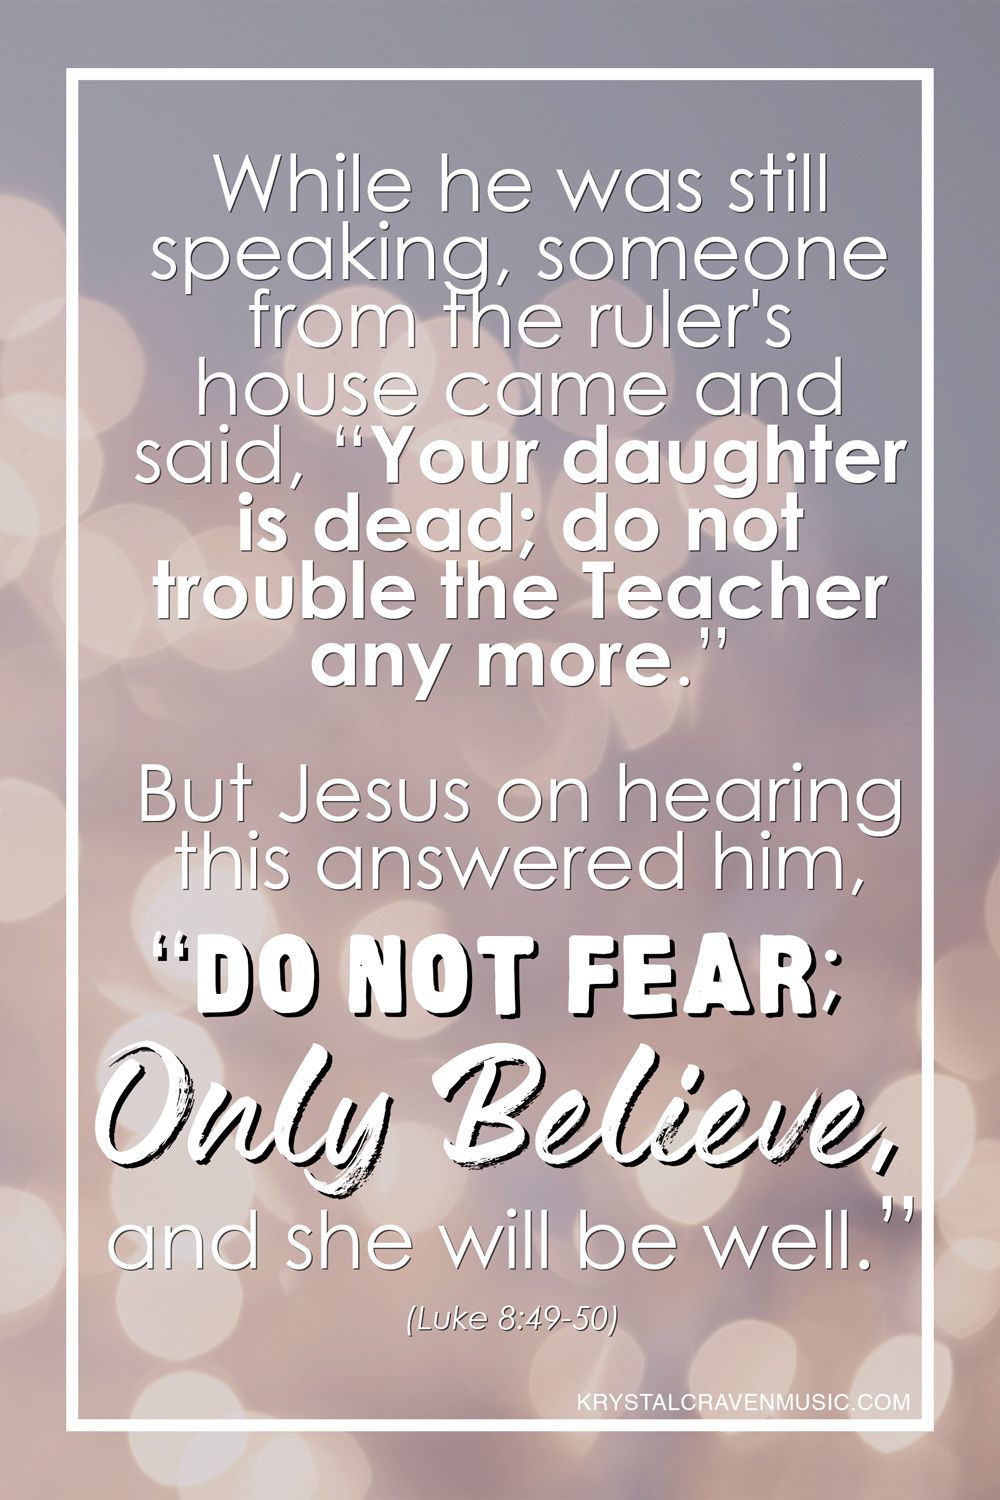 The title text "While he was still speaking, someone from the ruler's house came and said, "Your daughter is dead; do not trouble the Teacher any more." But Jesus on hearing this answered him, "Do not fear; only believe, and she will be well." The text is overlaying a blurred light bokeh.